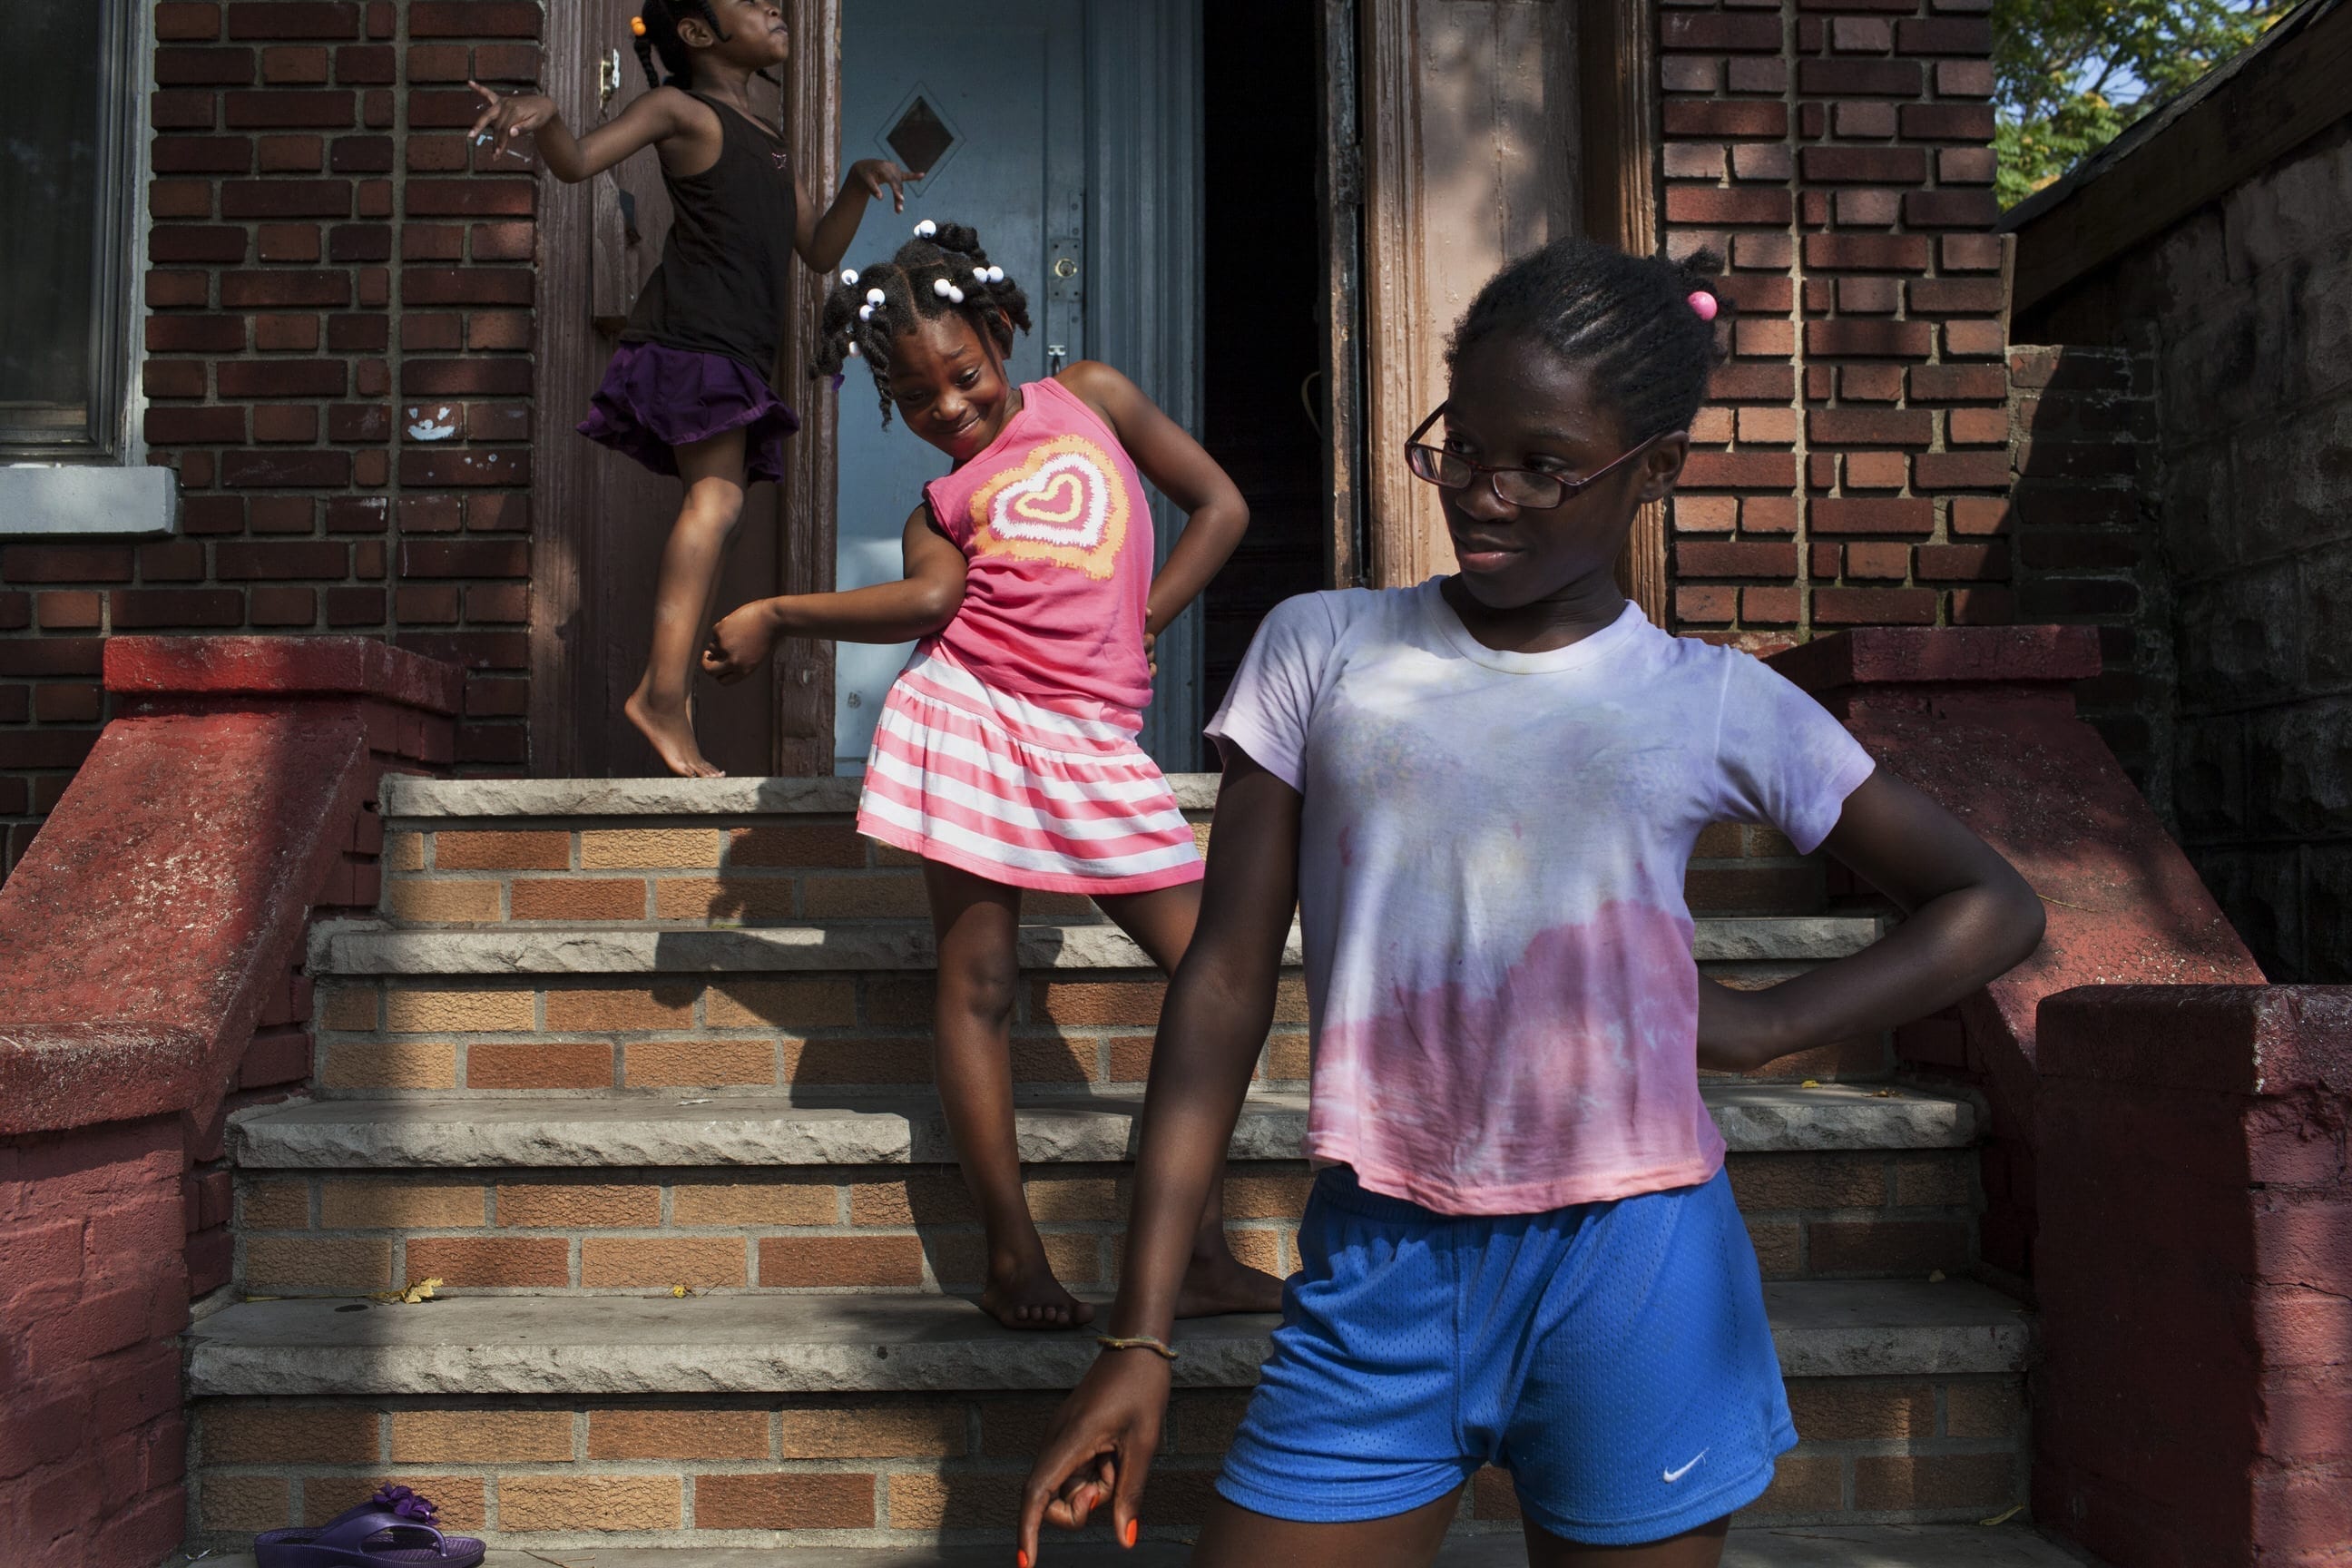 21st August, 2013. Flatbush, Brooklyn. Sarah's niece and her friends strike poses on the stoop of Sarah's home on a summer afternoon. Two months later, Sarah will be shot in the foot just a few feet from this stoop.